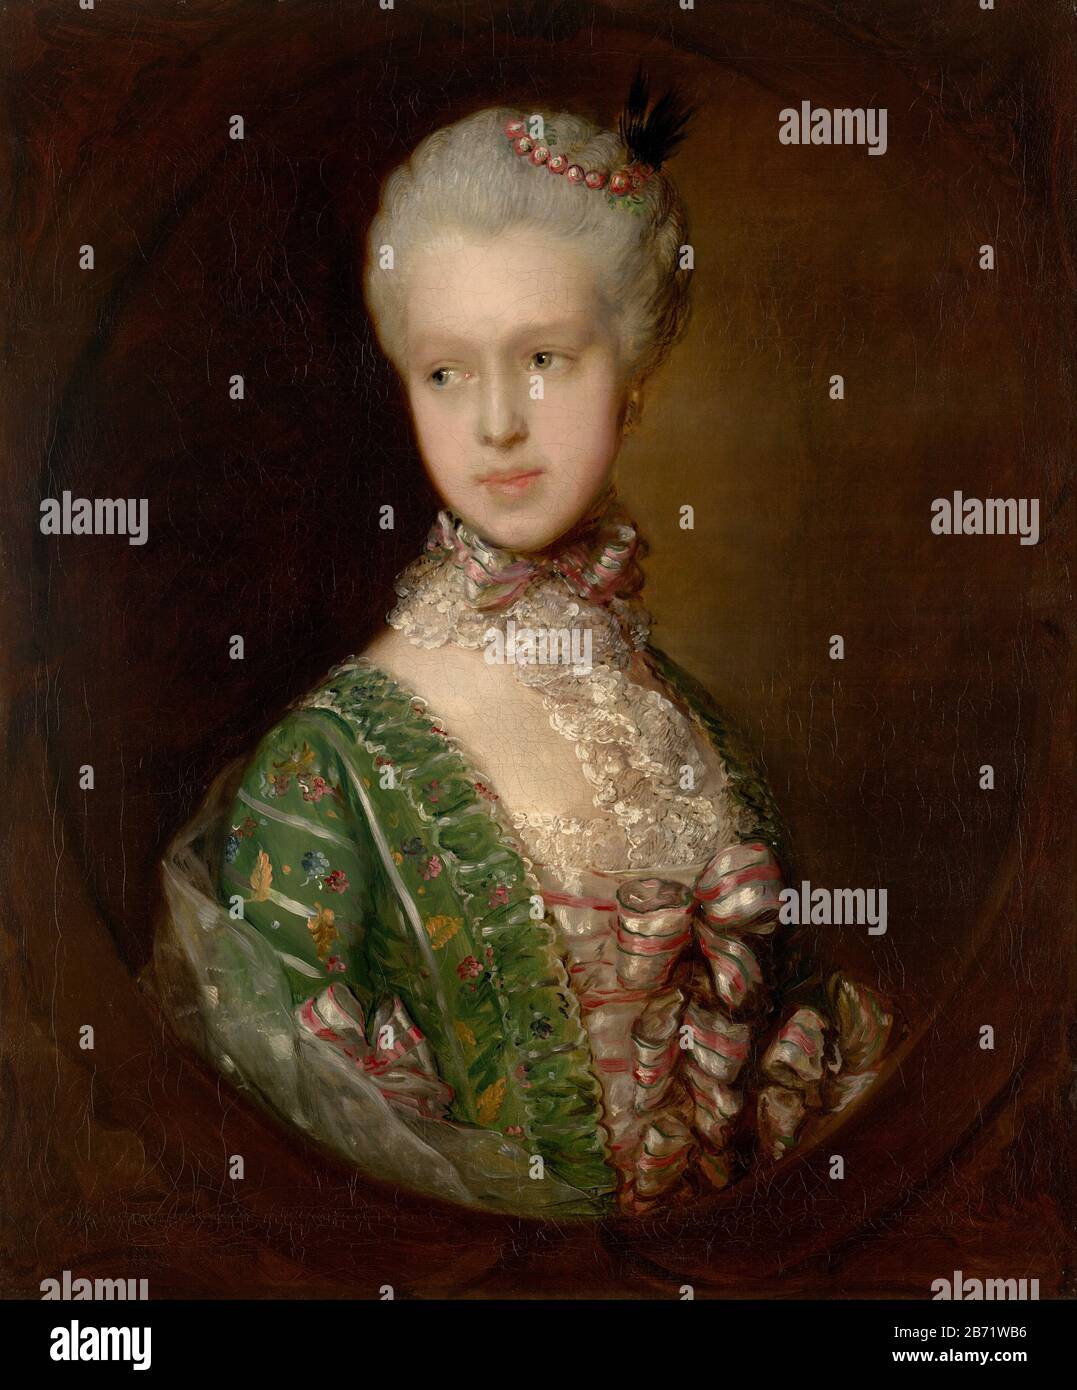 Elizabeth Wrottesley painted by Thomas Gainsborough in 1764 Stock Photo